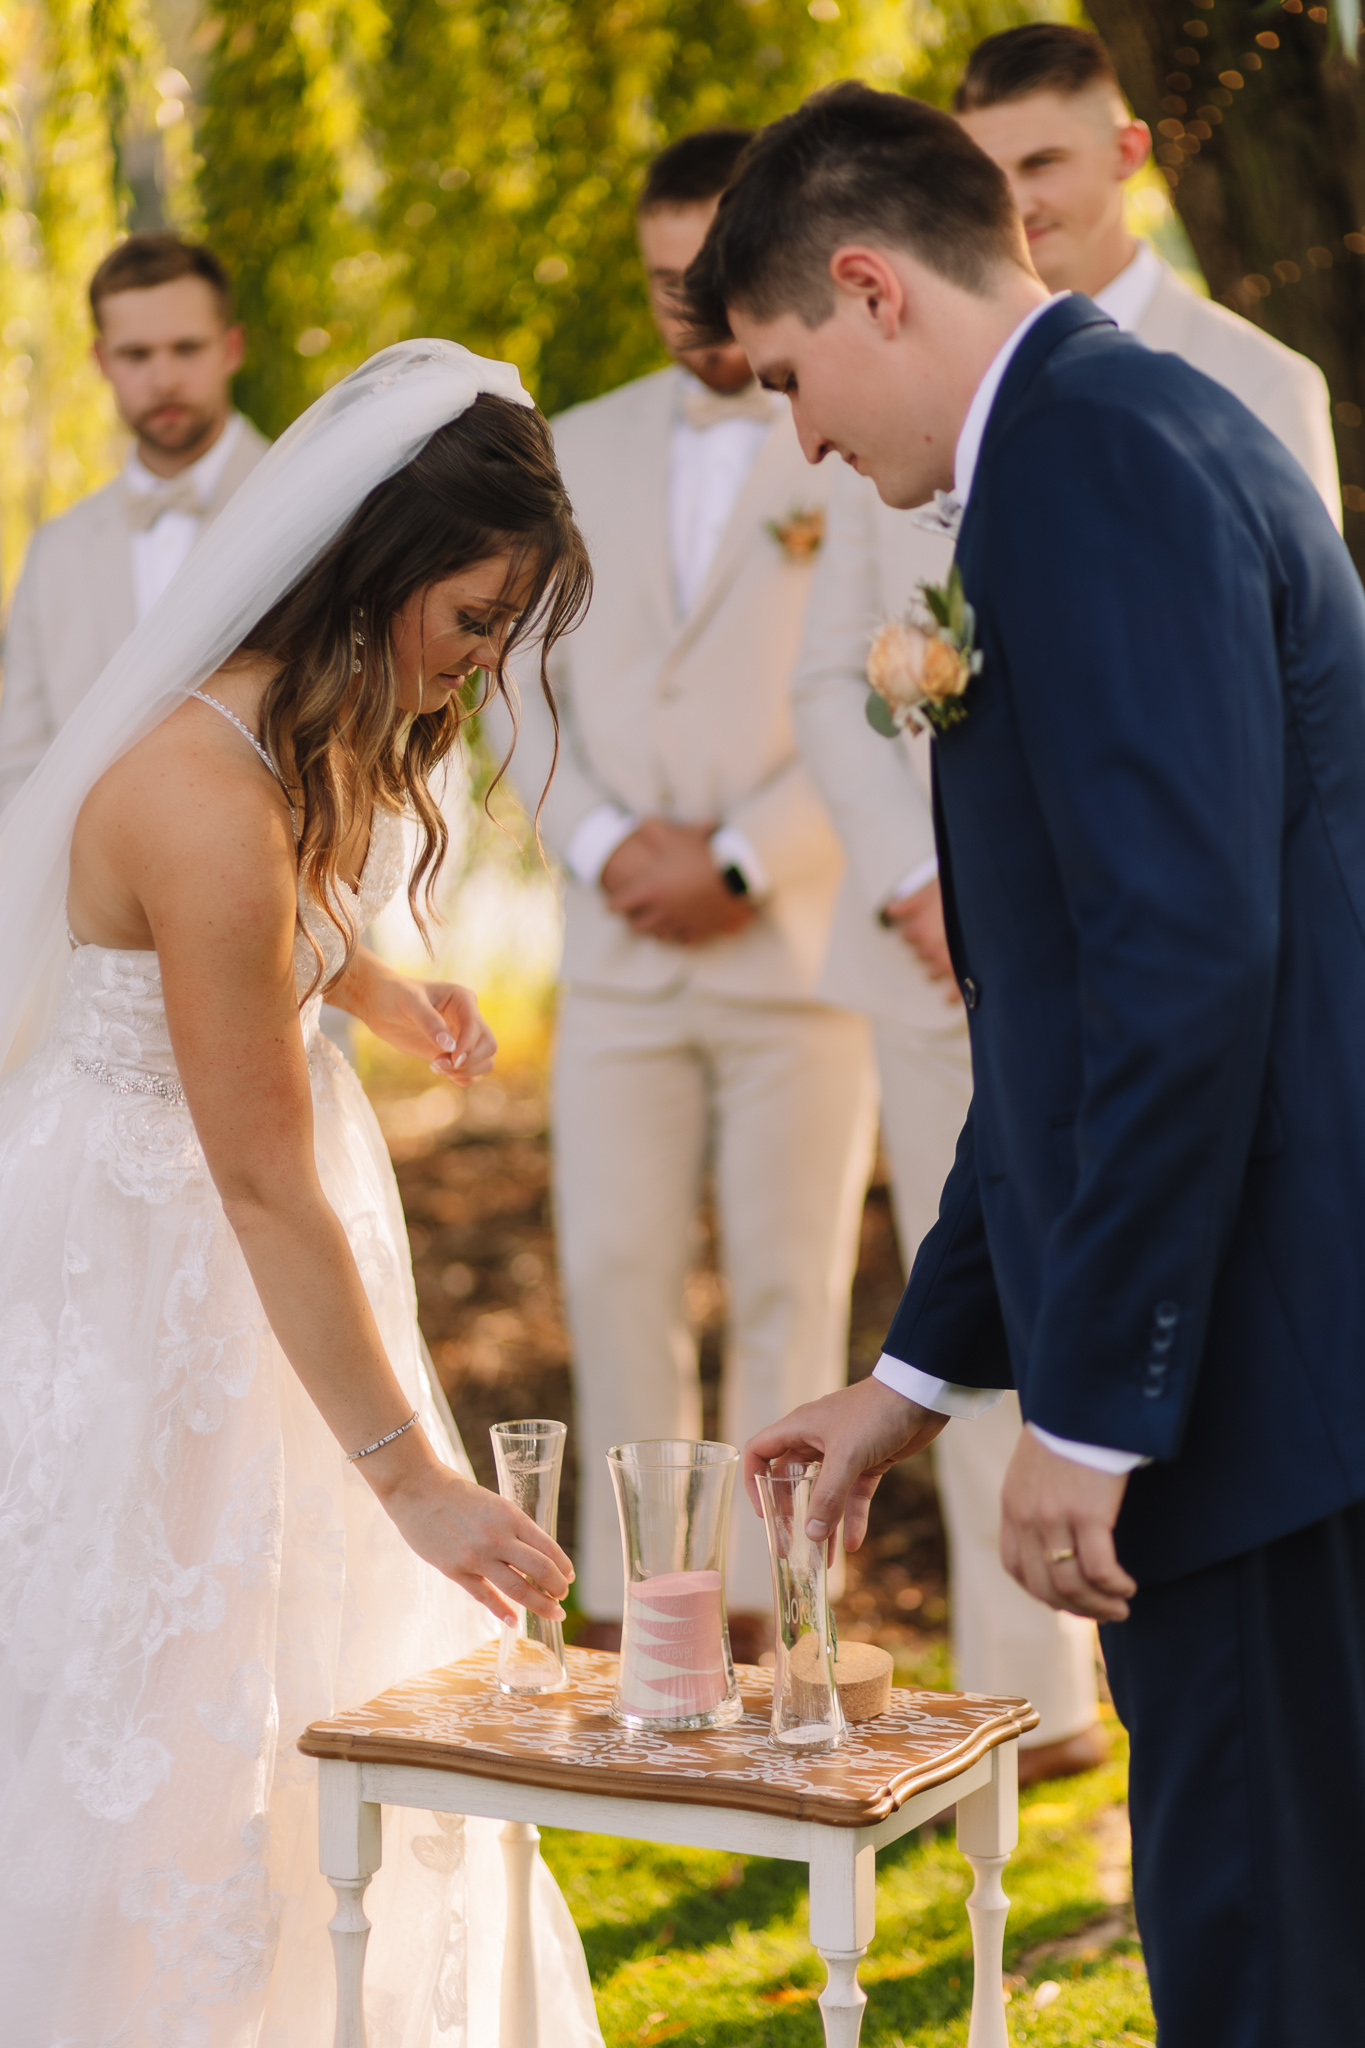 A bride and groom pouring sand together into a glass vase for their outdoor unity ceremony